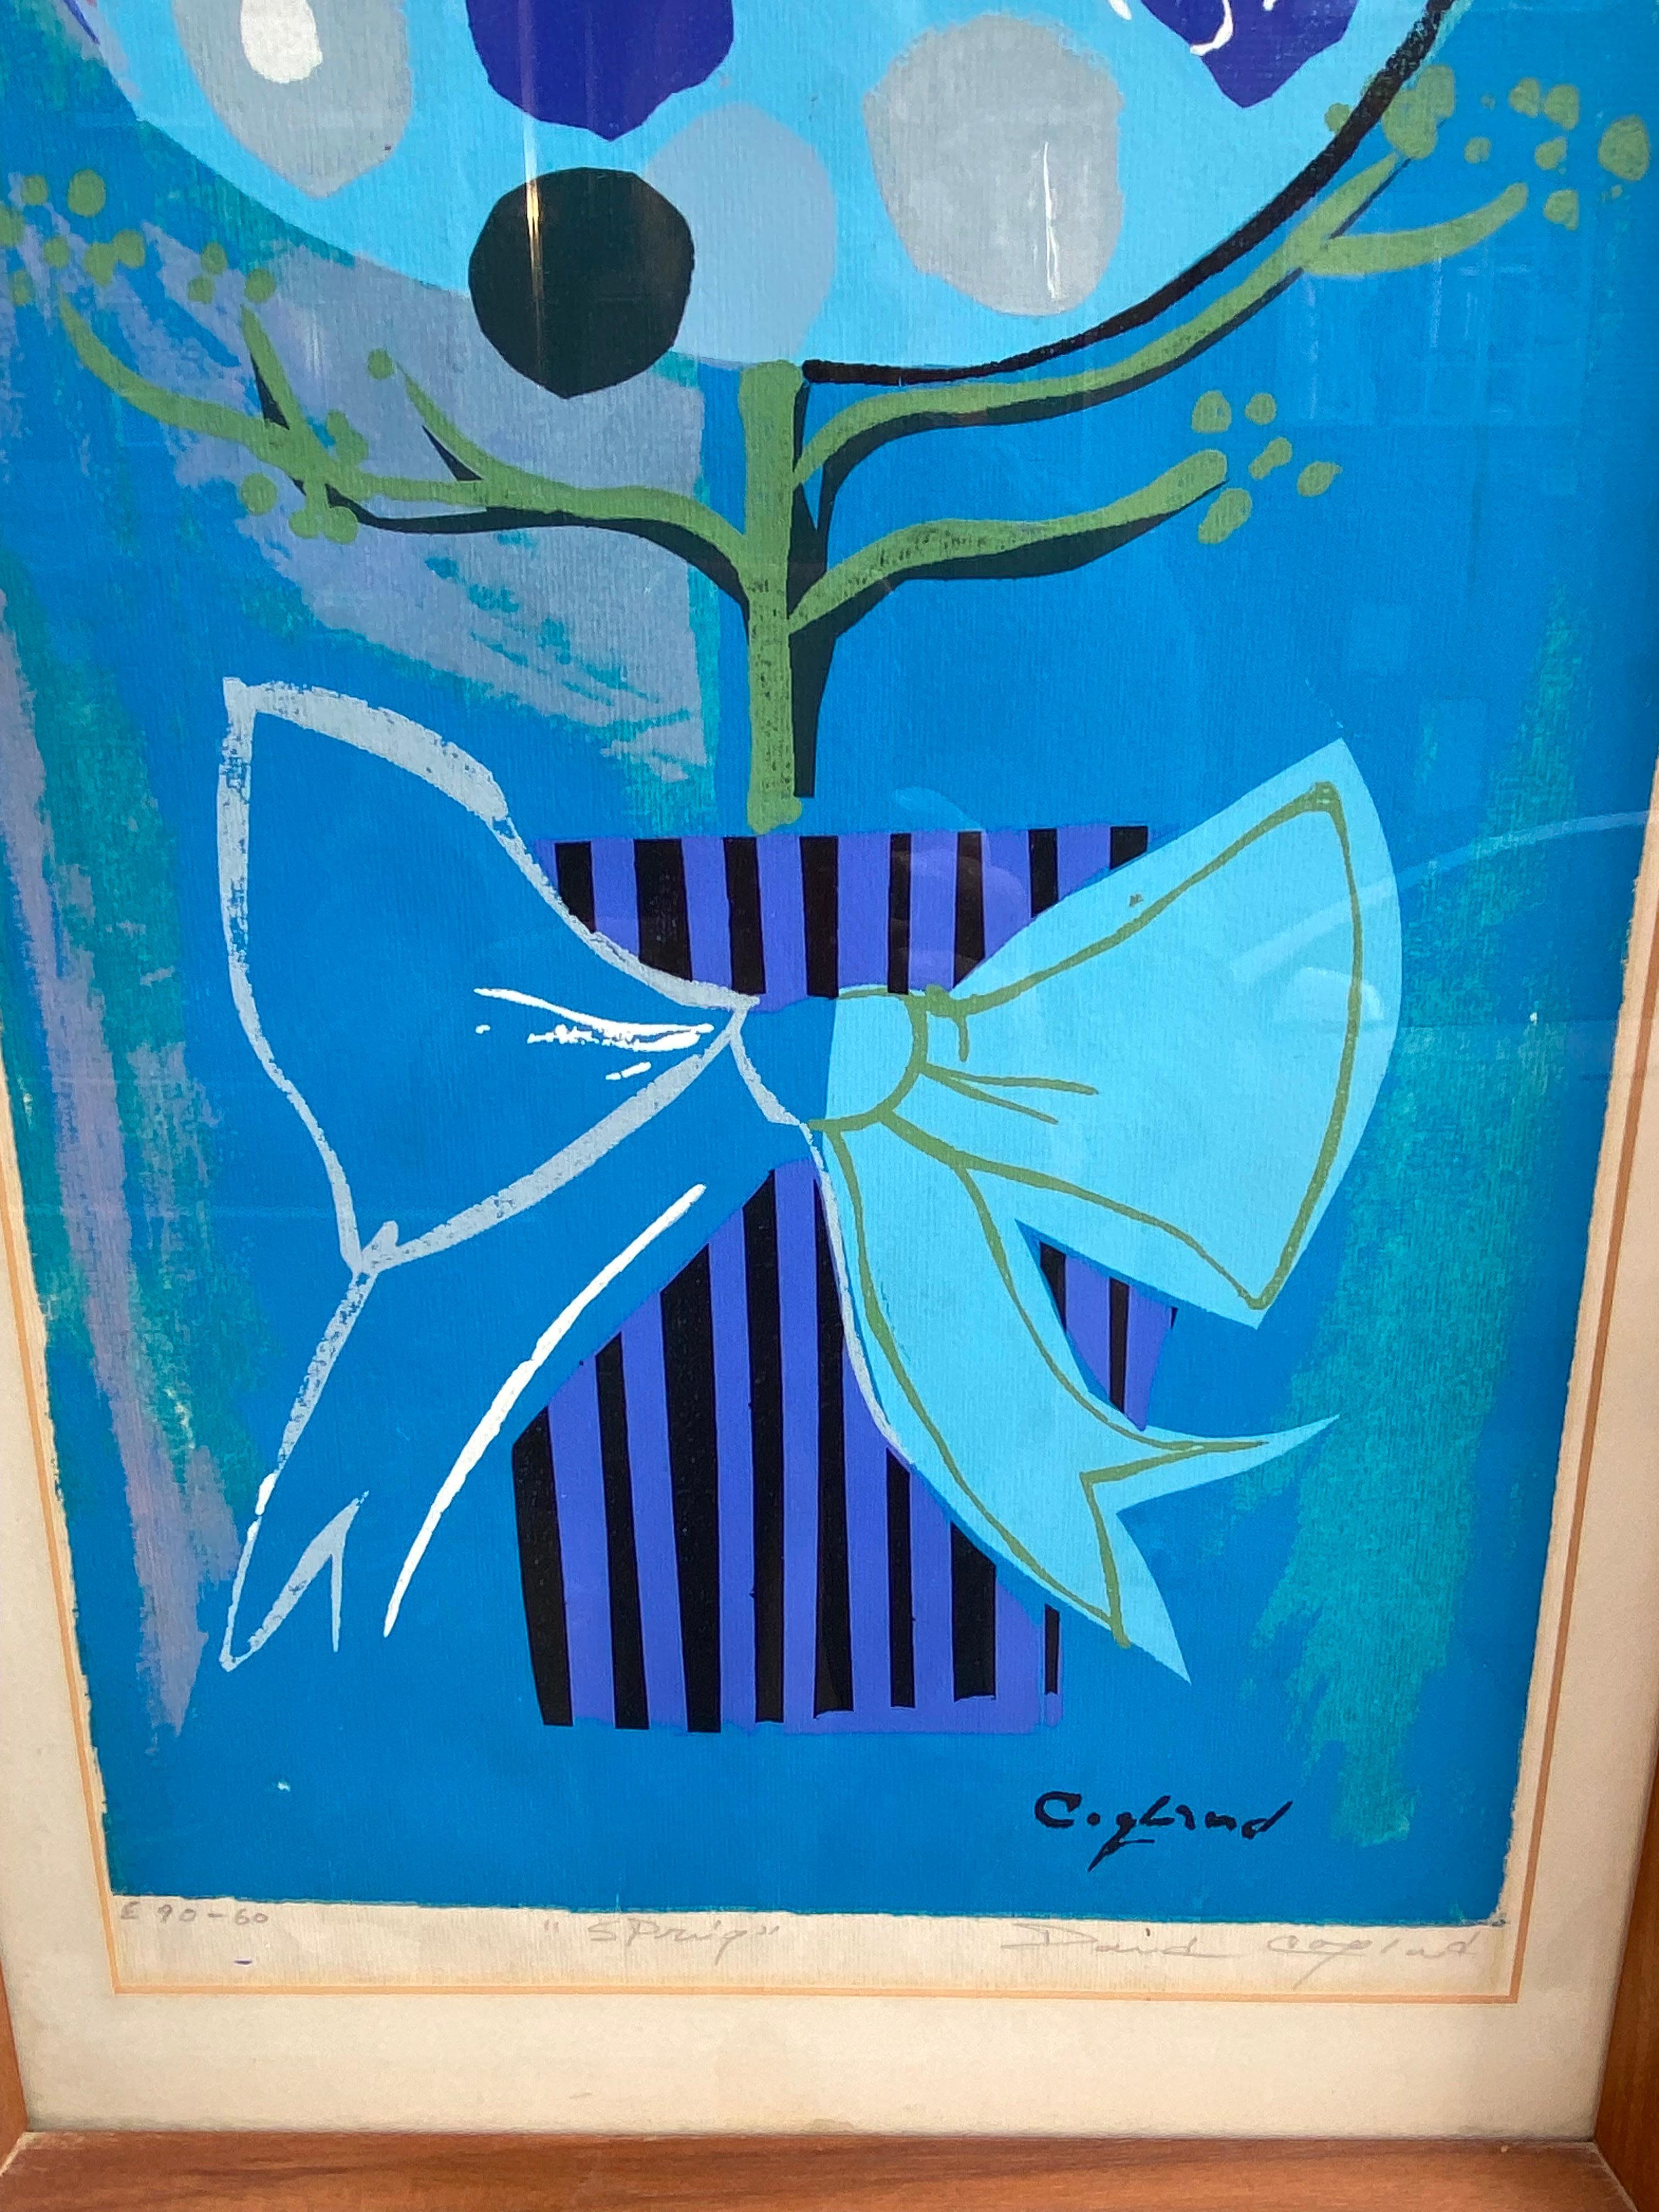 David Copeland Lithograph of a Stacked Flower in a pot.  Great 60's vibe with really nice shades of blues!  In nice condition!  Looks like original frame!